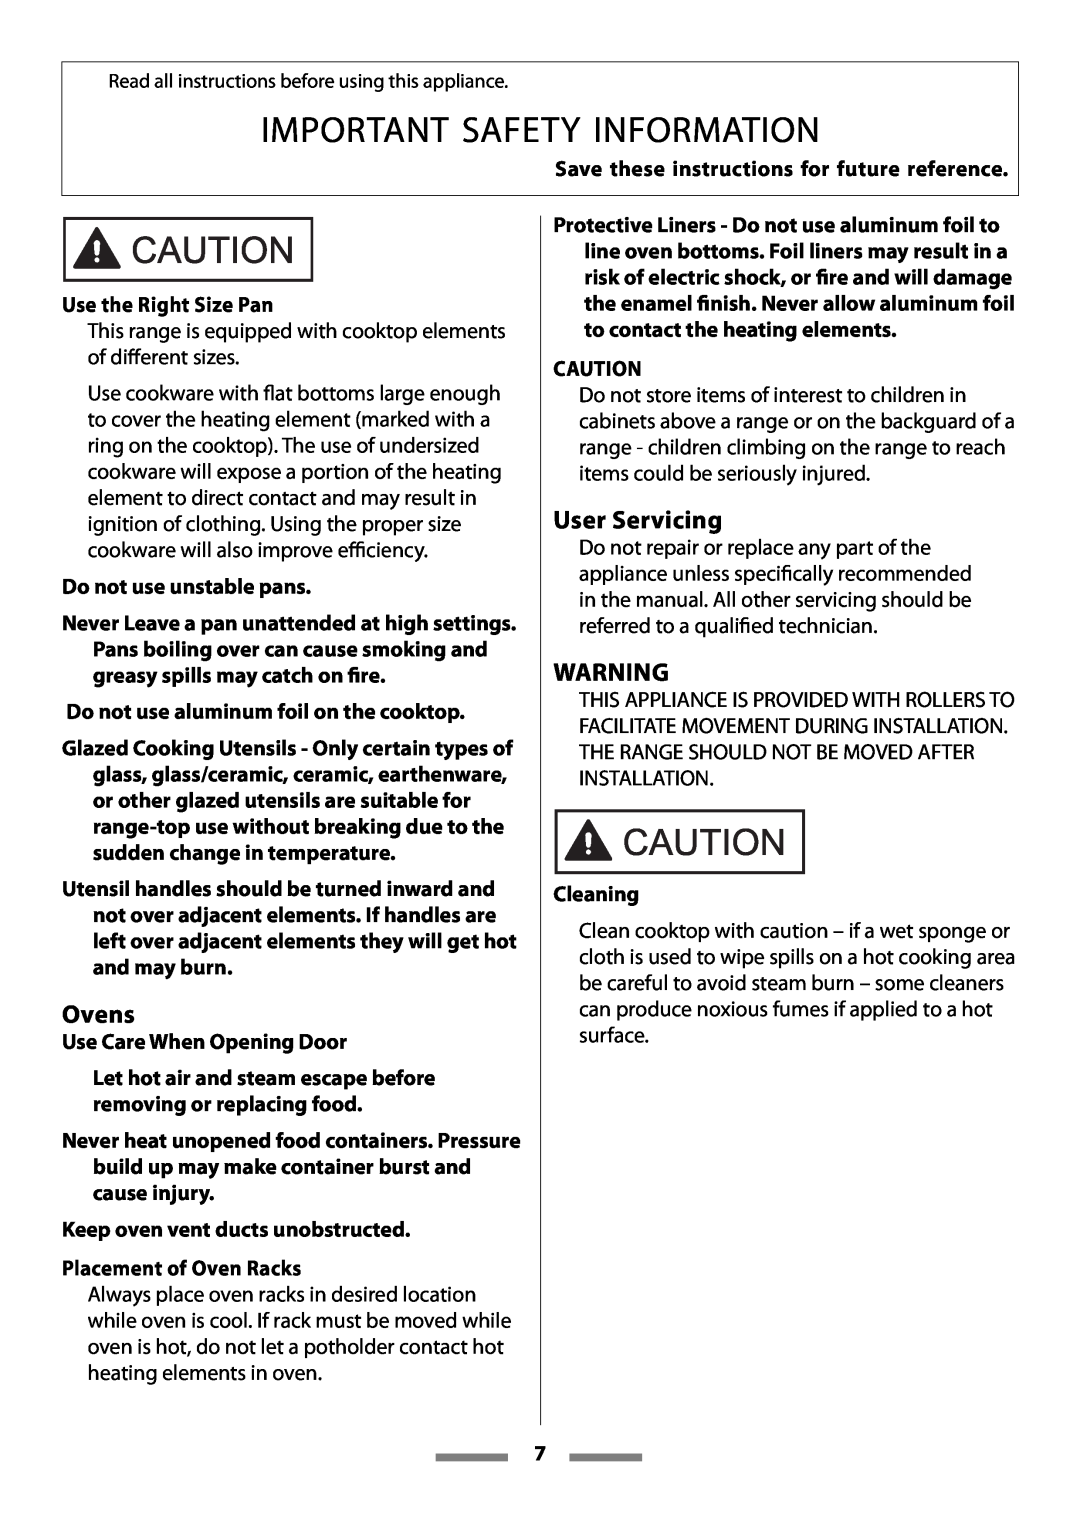 Aga Ranges Legacy 44 Ovens, User Servicing, Important Safety Information, Save these instructions for future reference 